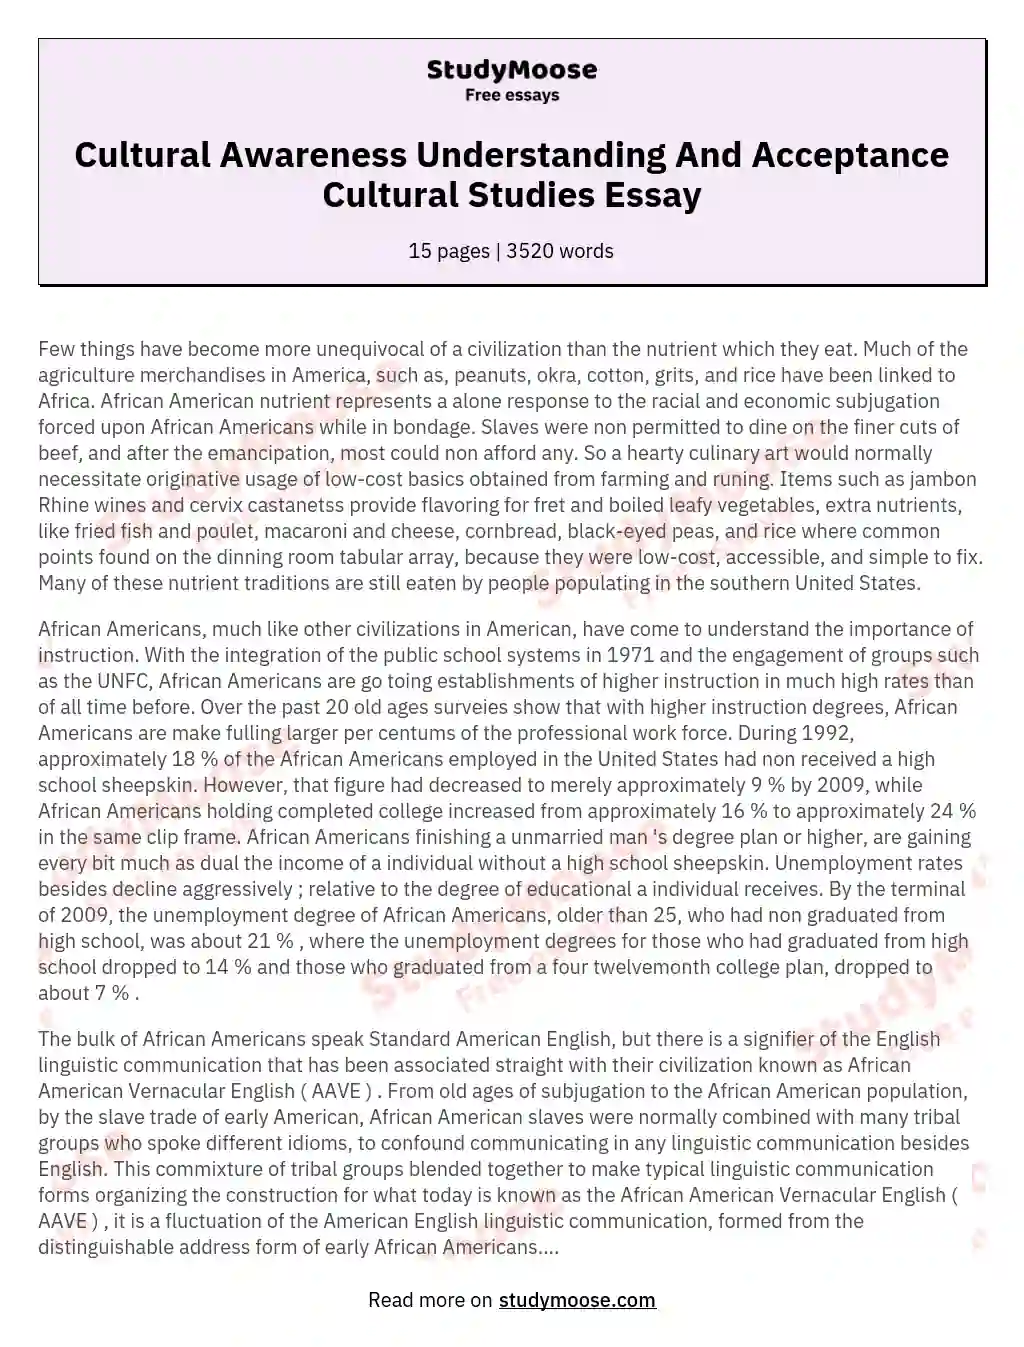 Cultural Awareness Understanding And Acceptance Cultural Studies Essay